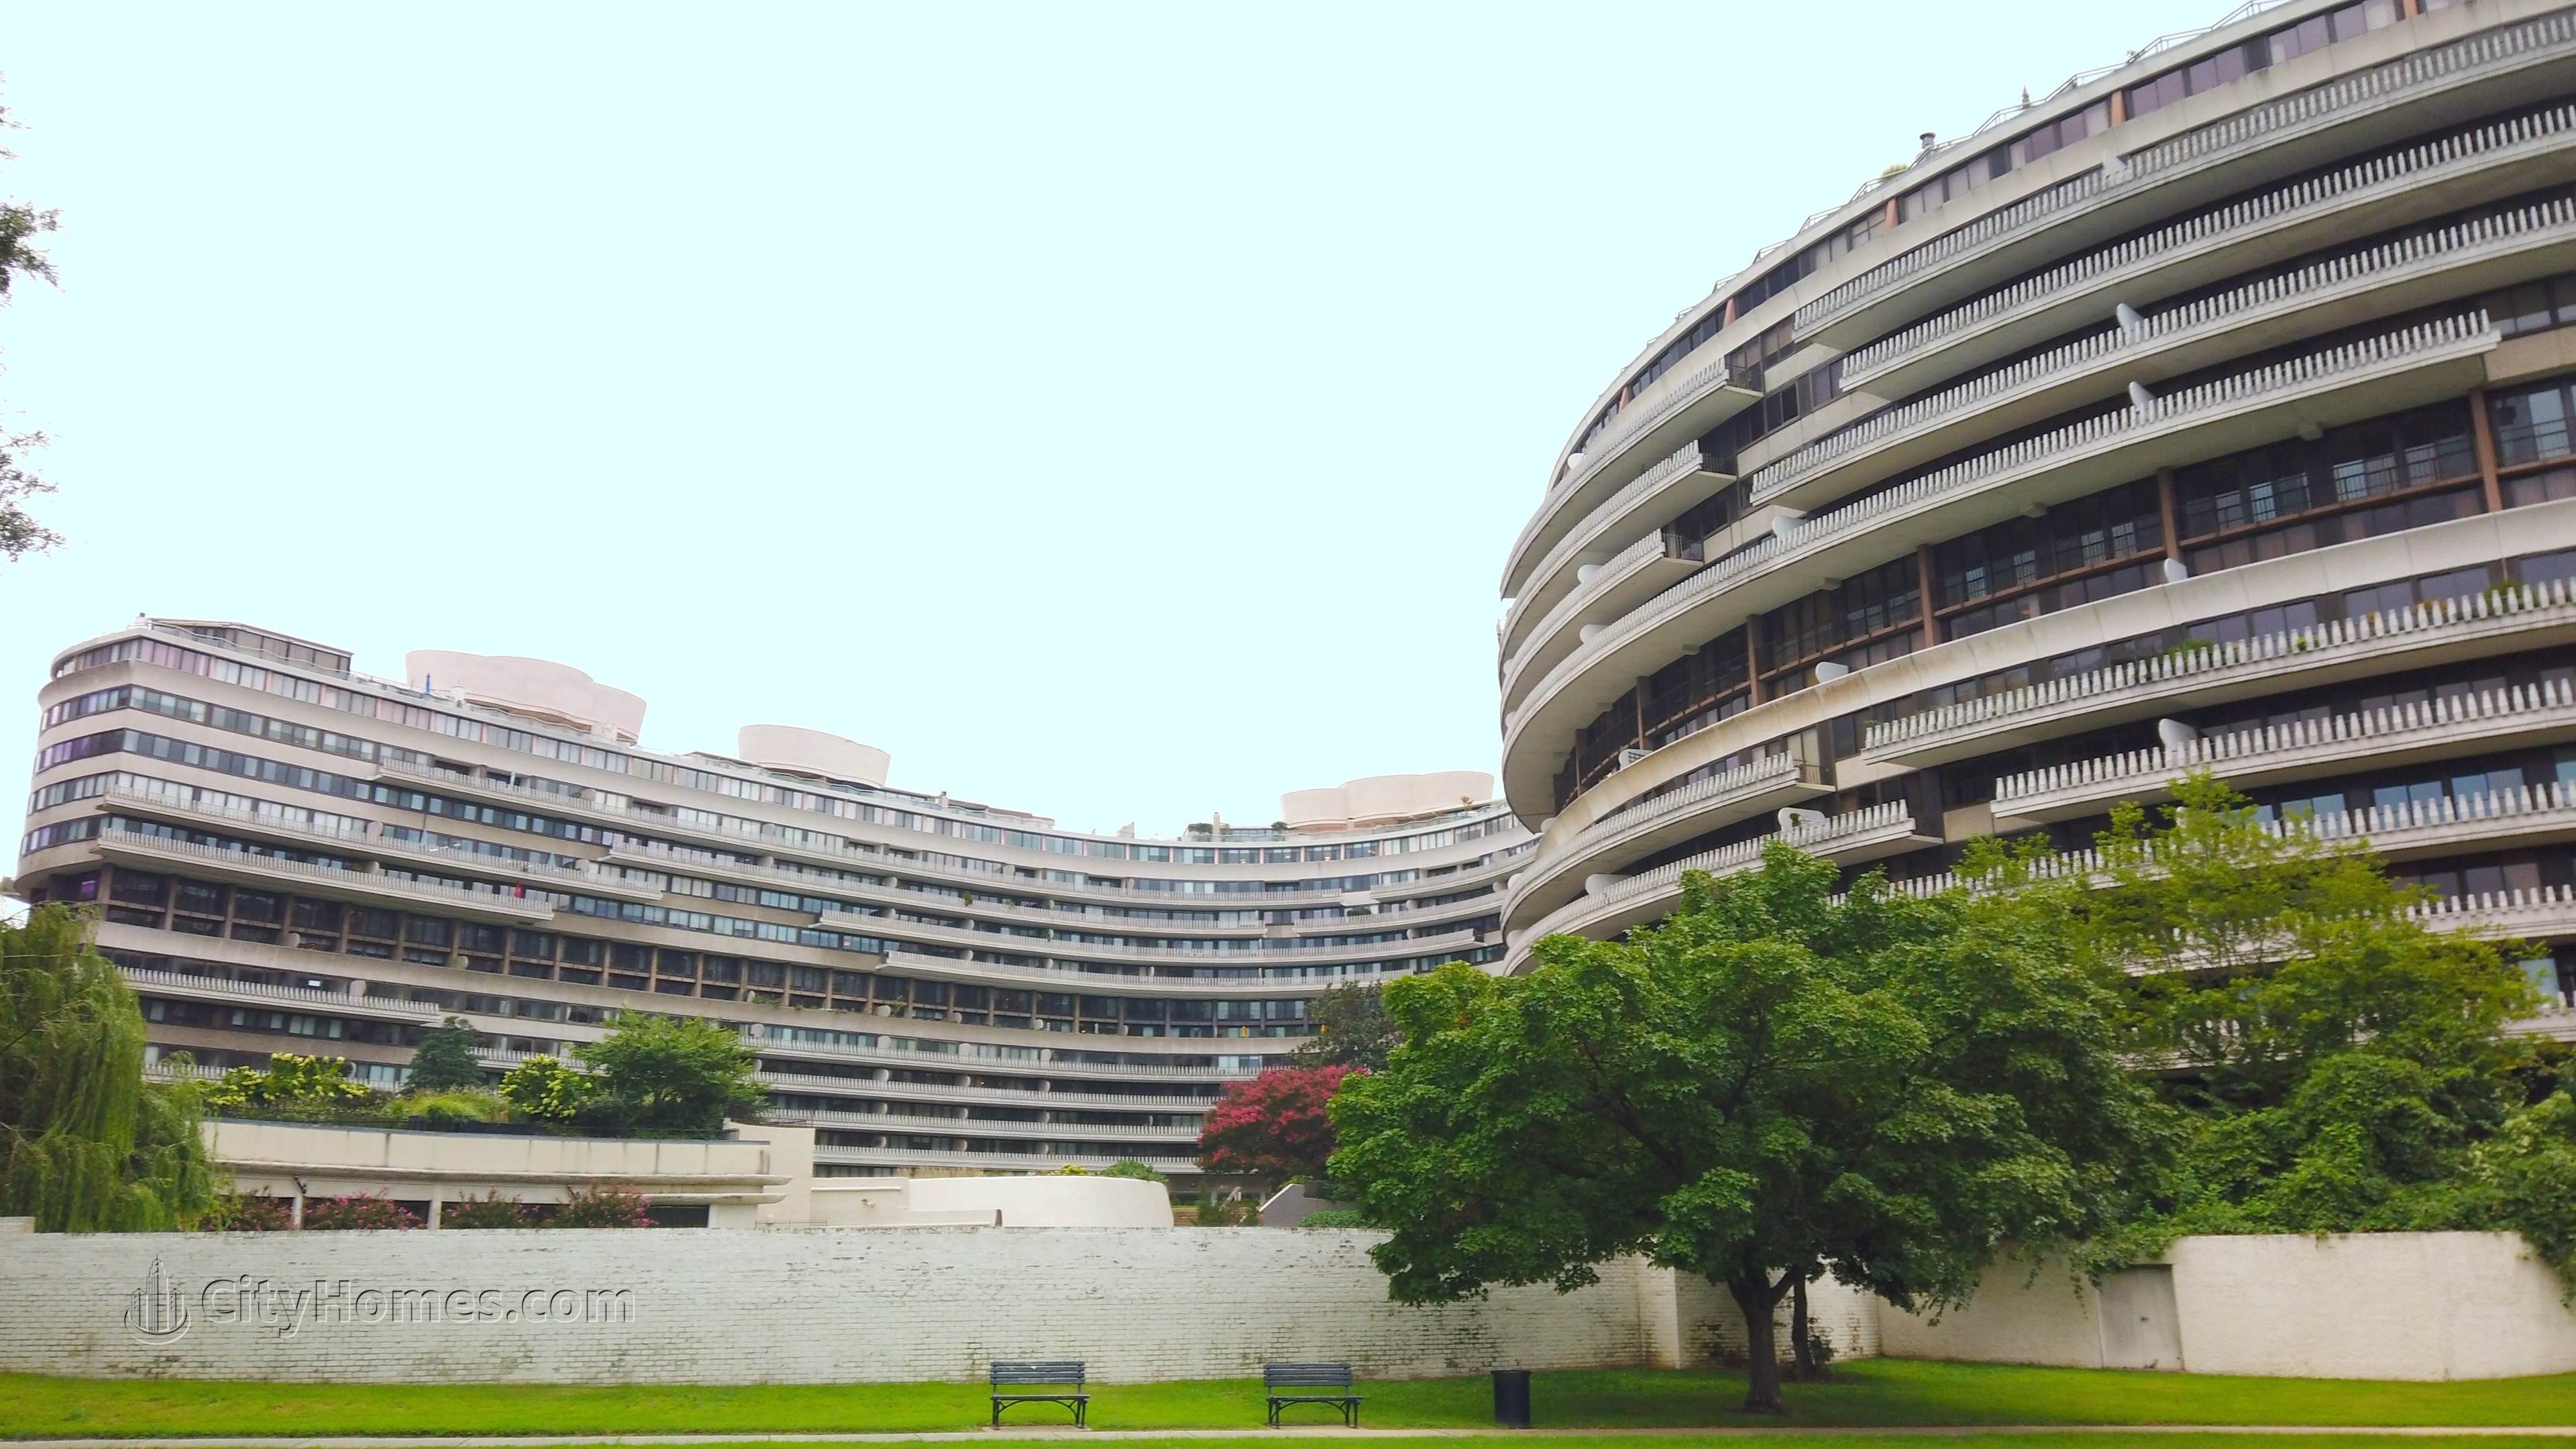 3. The Watergate xây dựng tại 700 New Hampshire Ave NW, Foggy Bottom, Washington, DC 20037